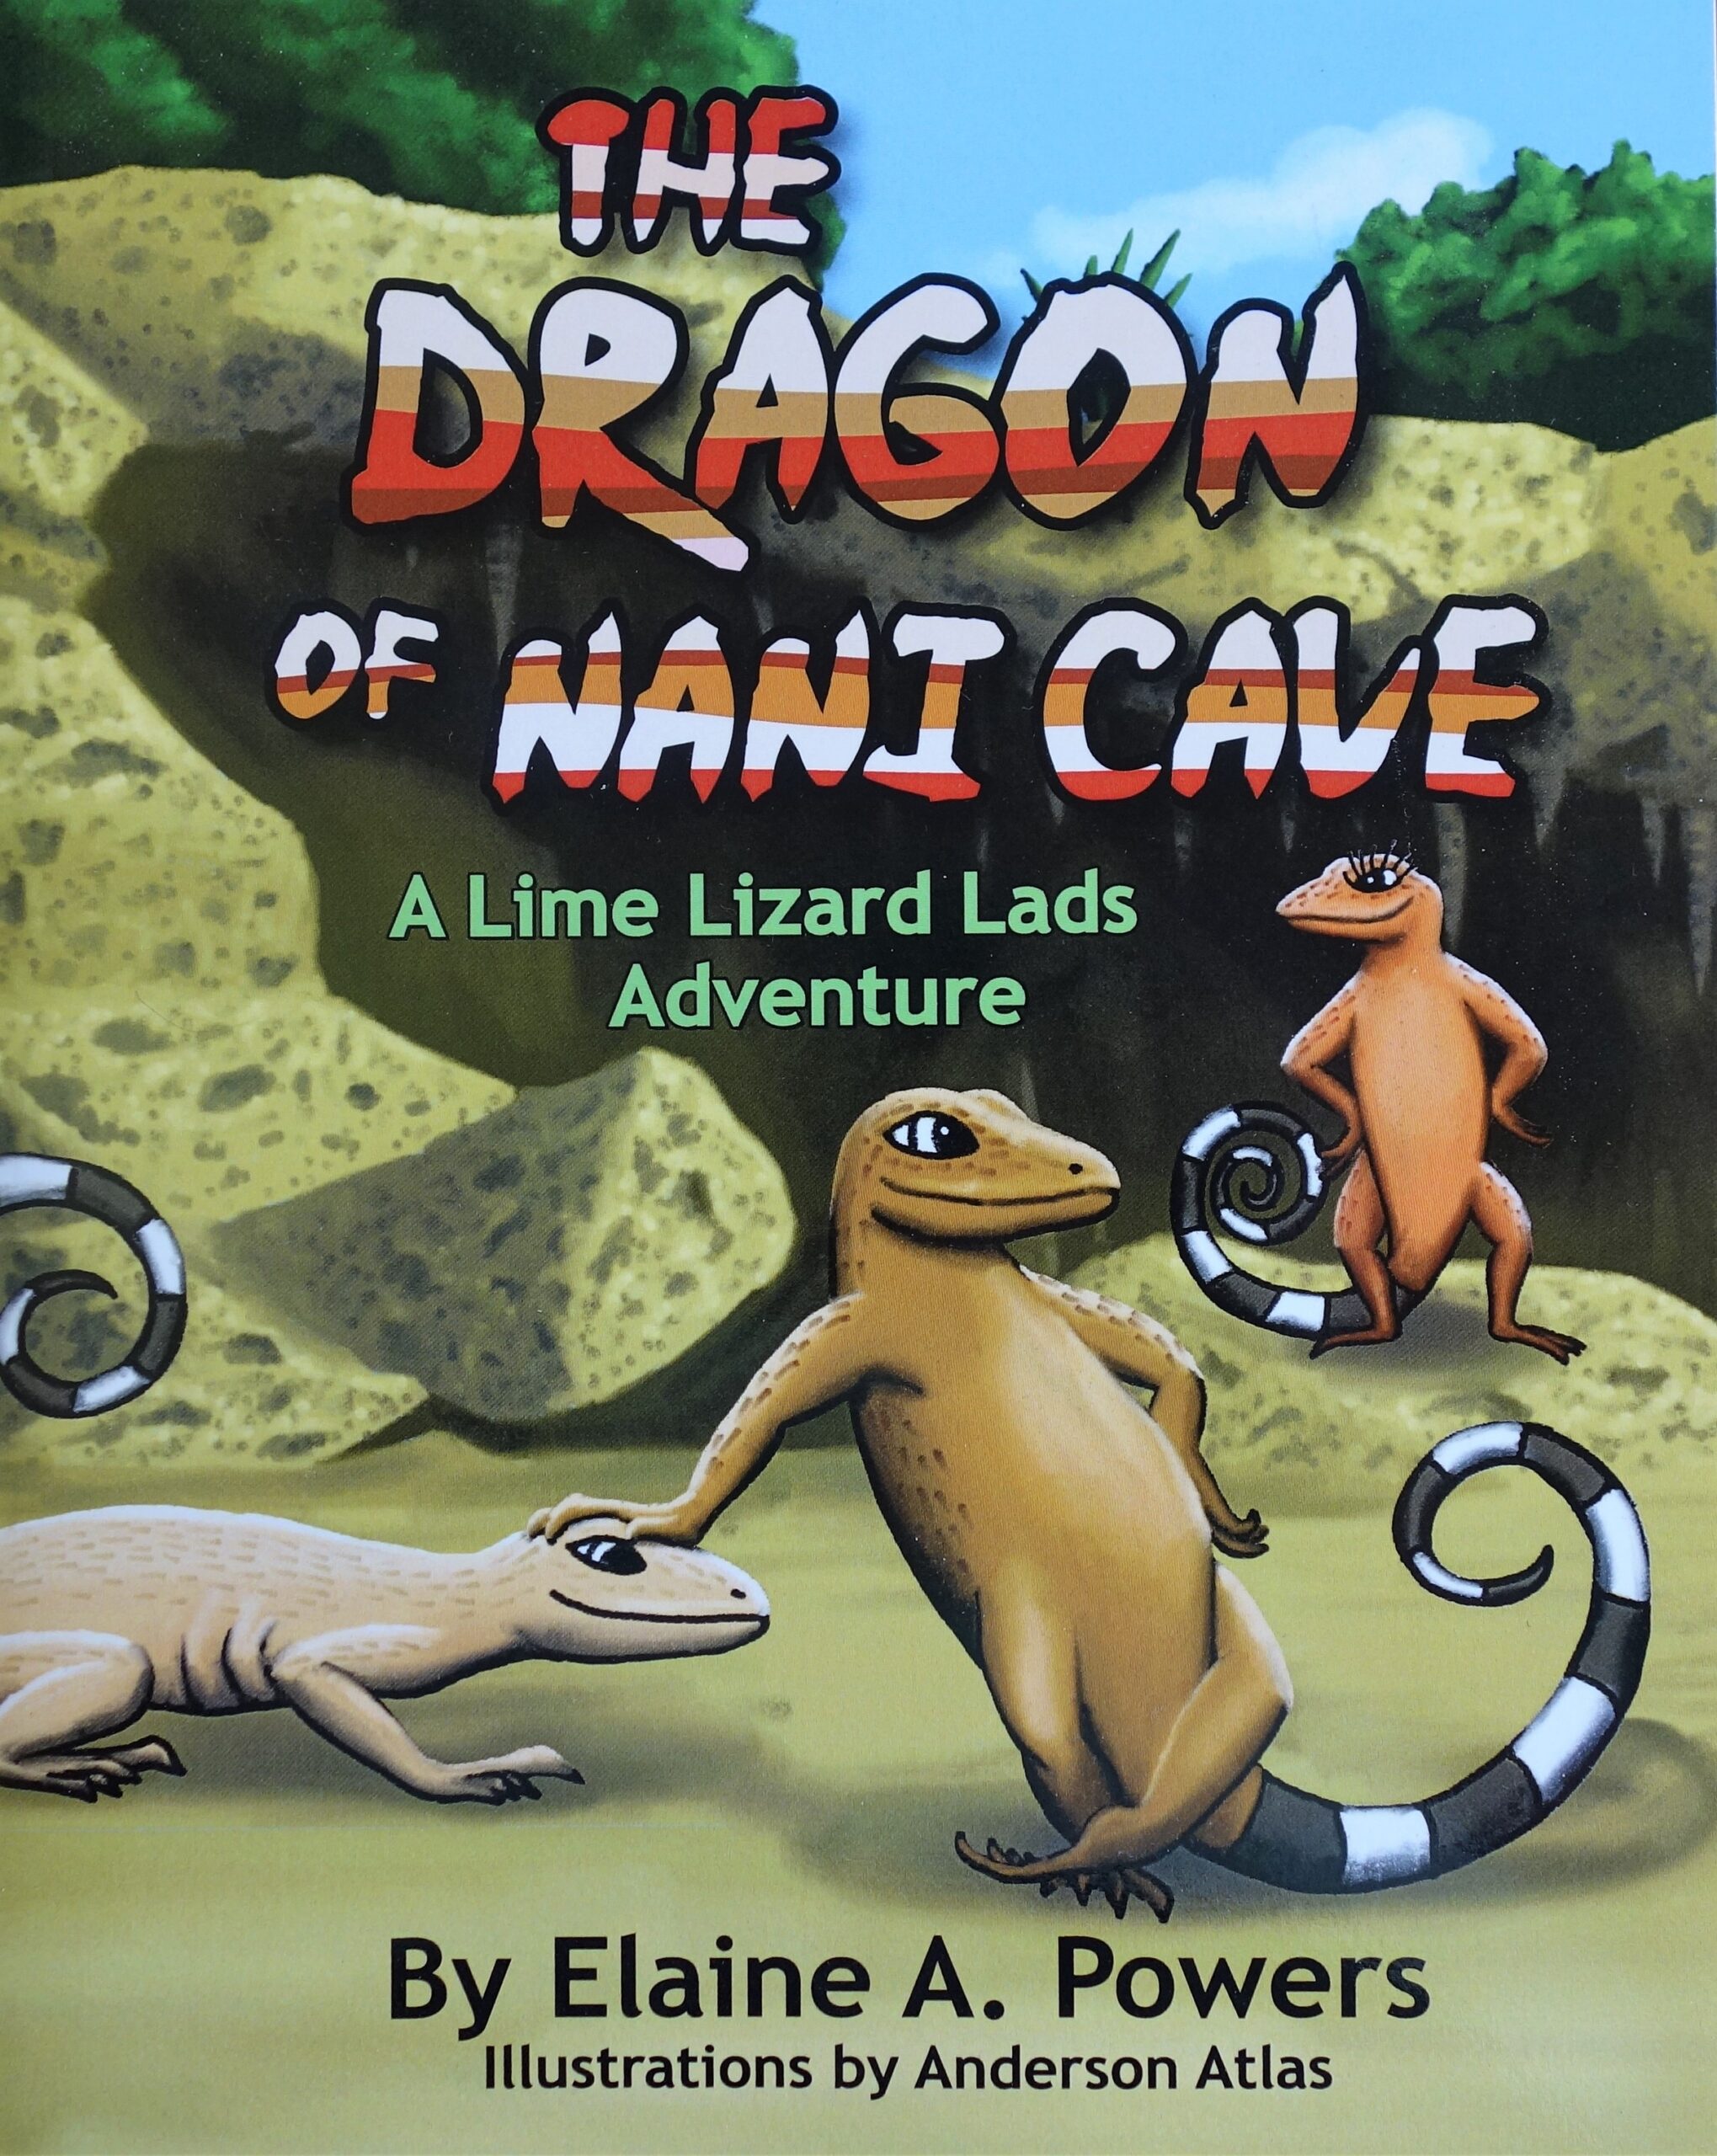 book cover illustration with two iguanas